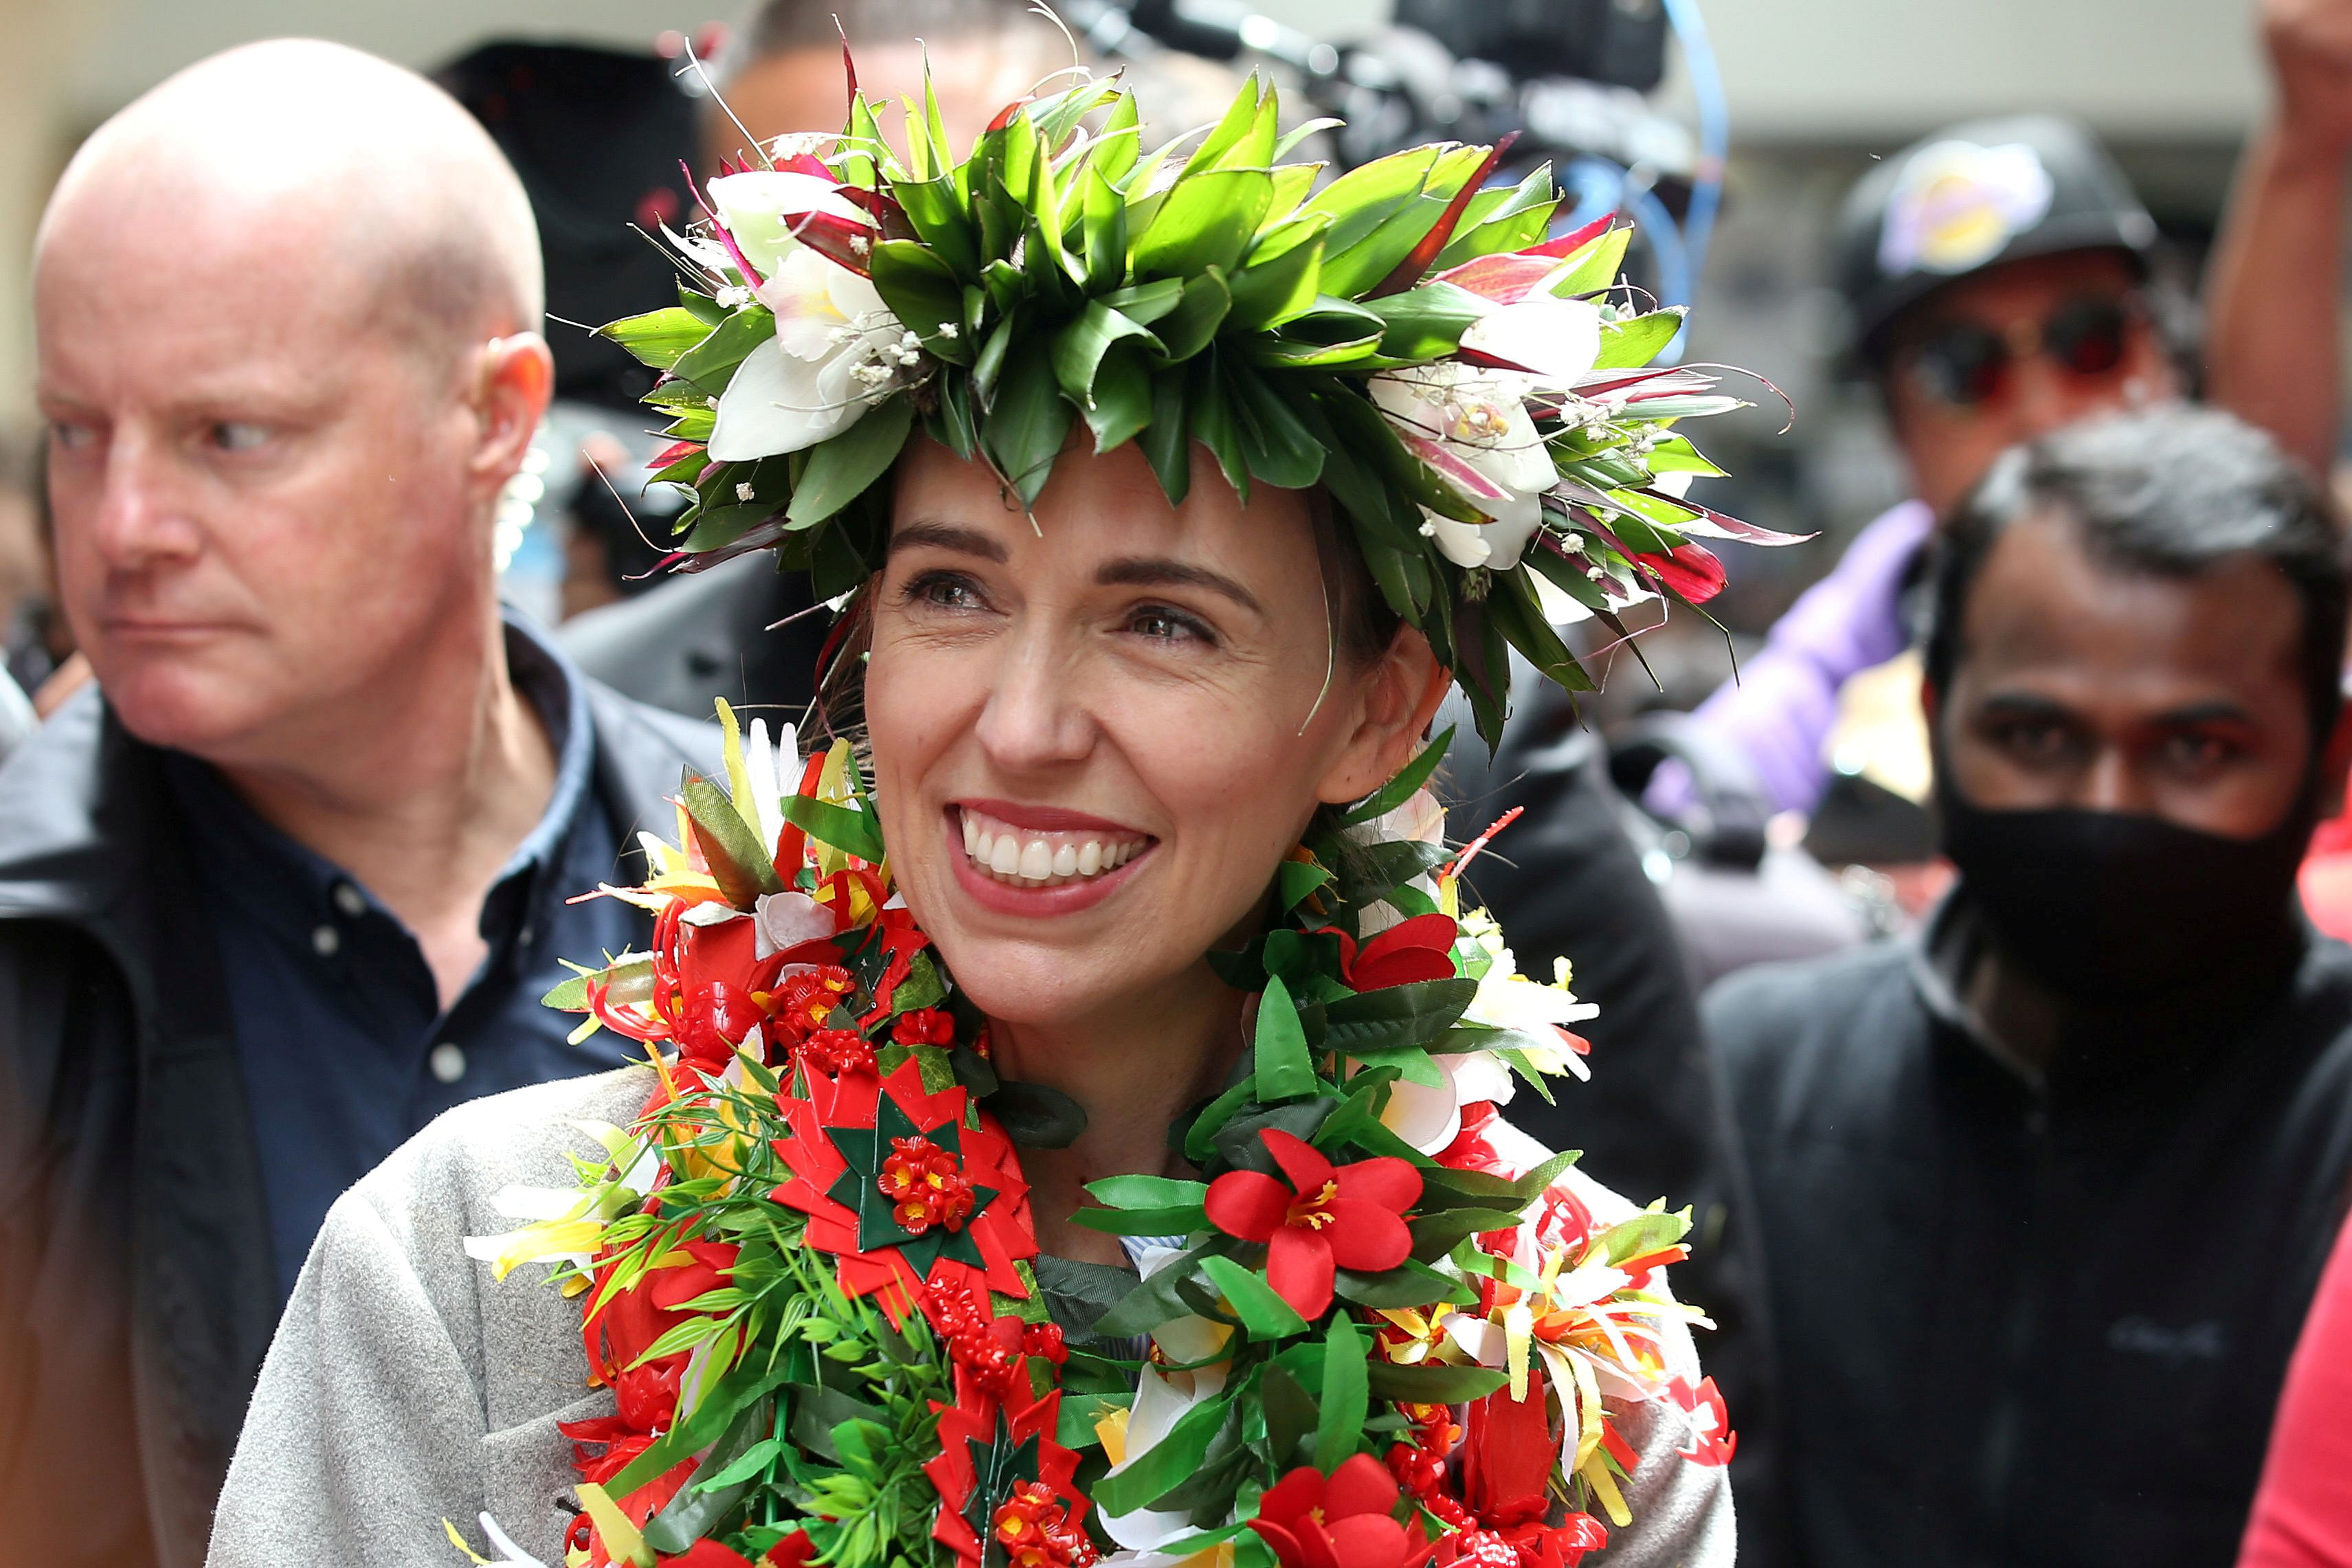 New Zealand's Prime Minister Jacinda Ardern smiles during a campaign outing at Mangere Town Centre and market in Auckland, New Zealand. Credit: Reuters Photo